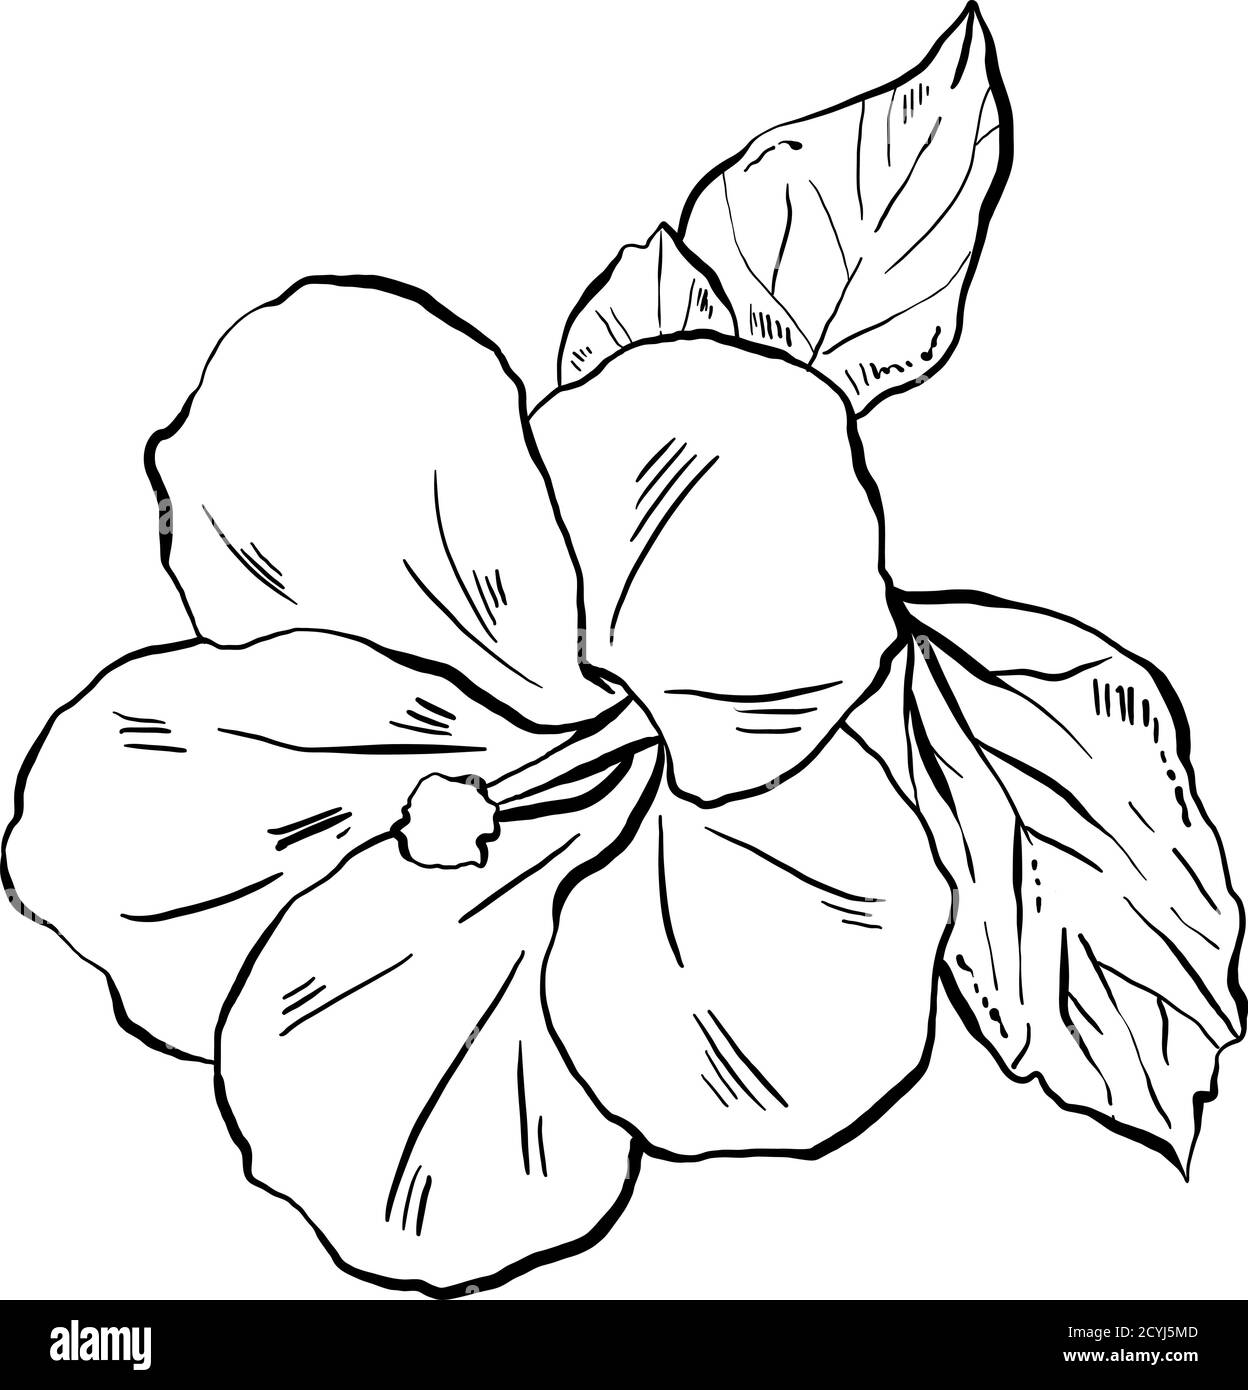 Hibiscus Flower Drawing Black and White Stock Photos & Images - Alamy